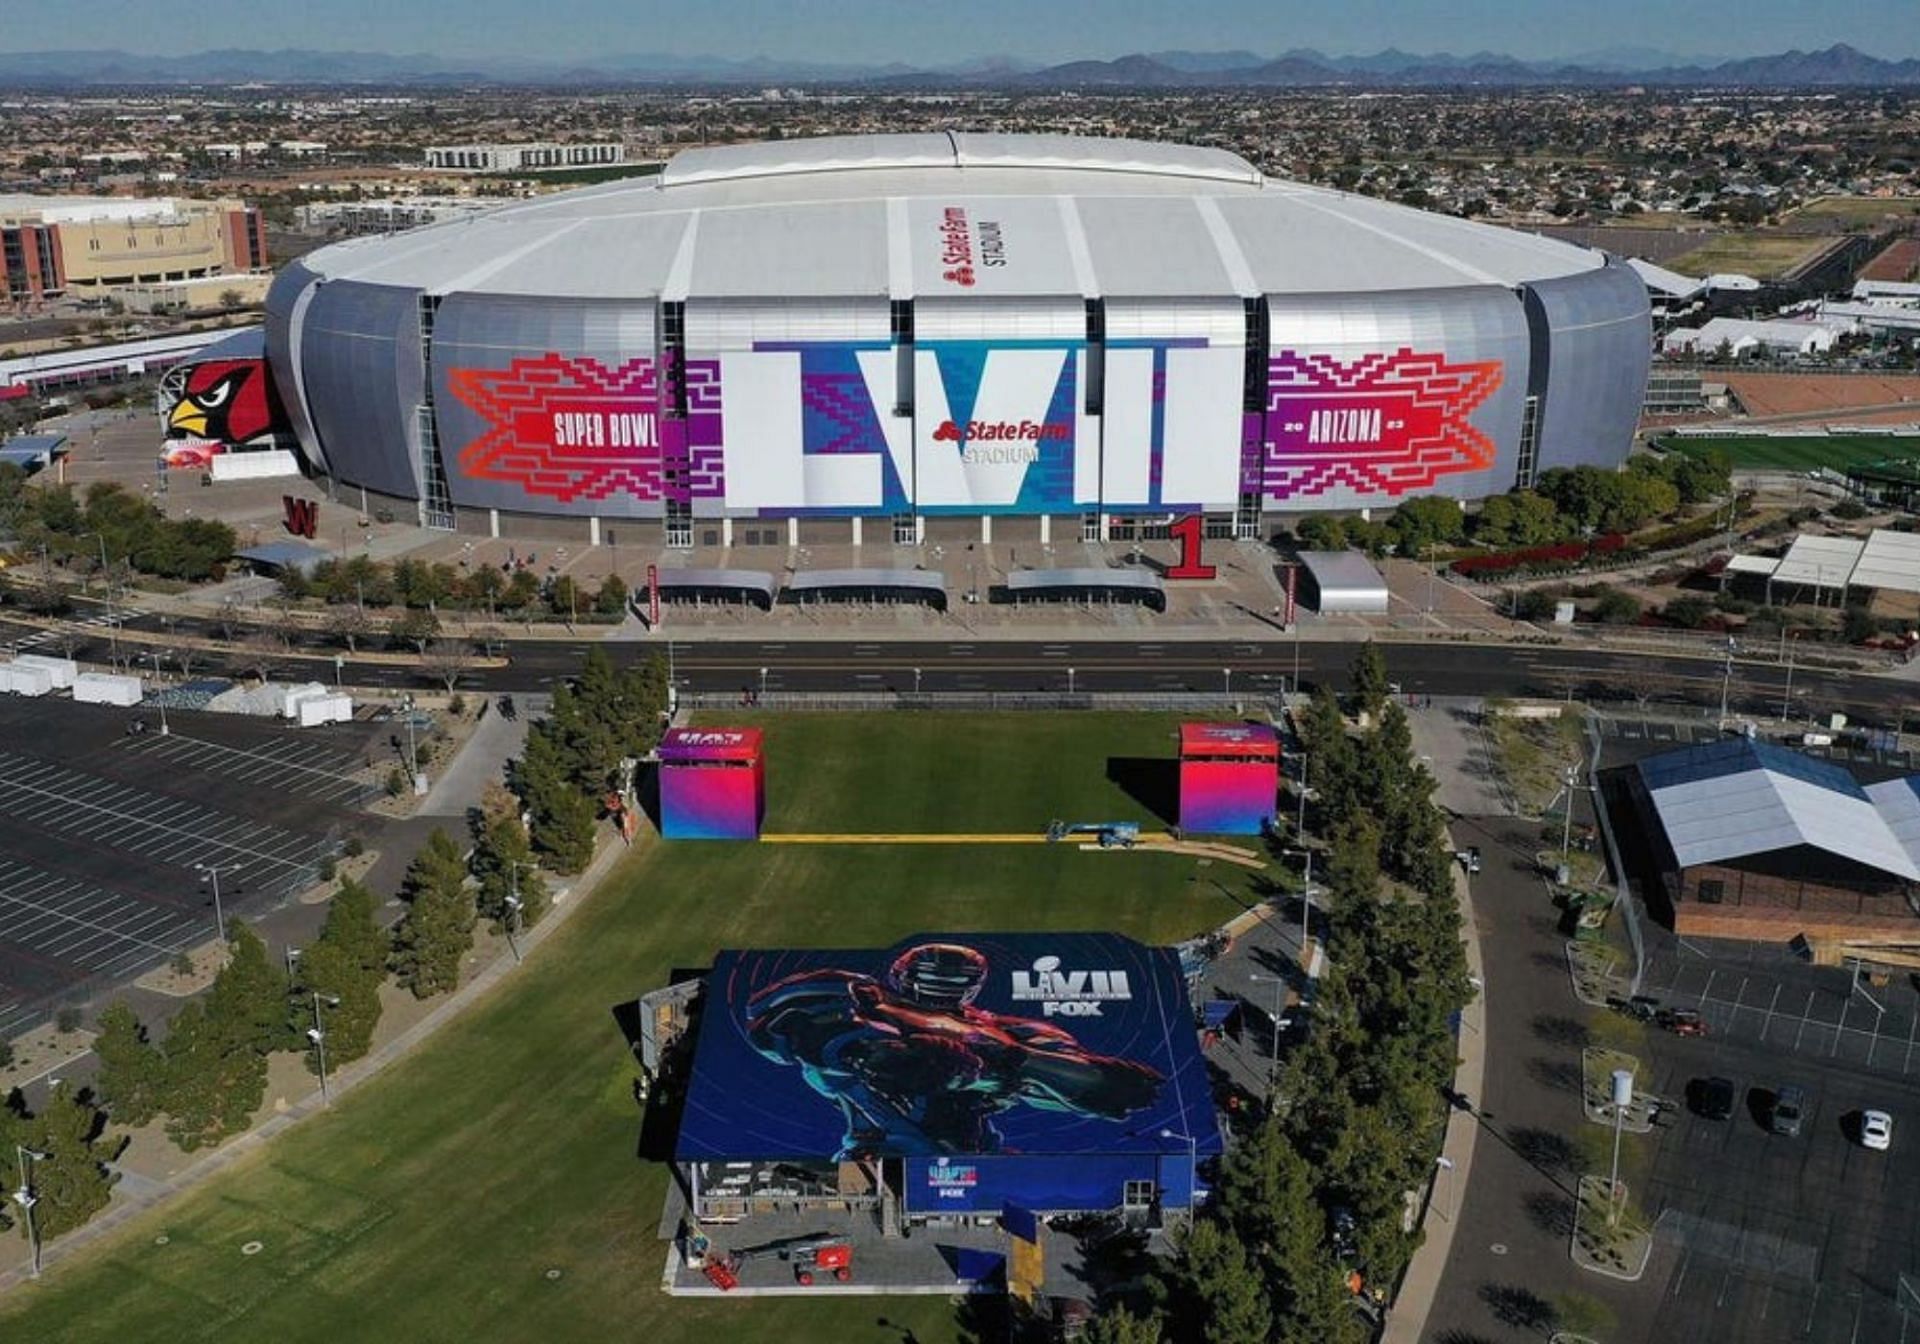 Super Bowl 2023: When & Where To Watch Super Bowl LVII 2023 In India?